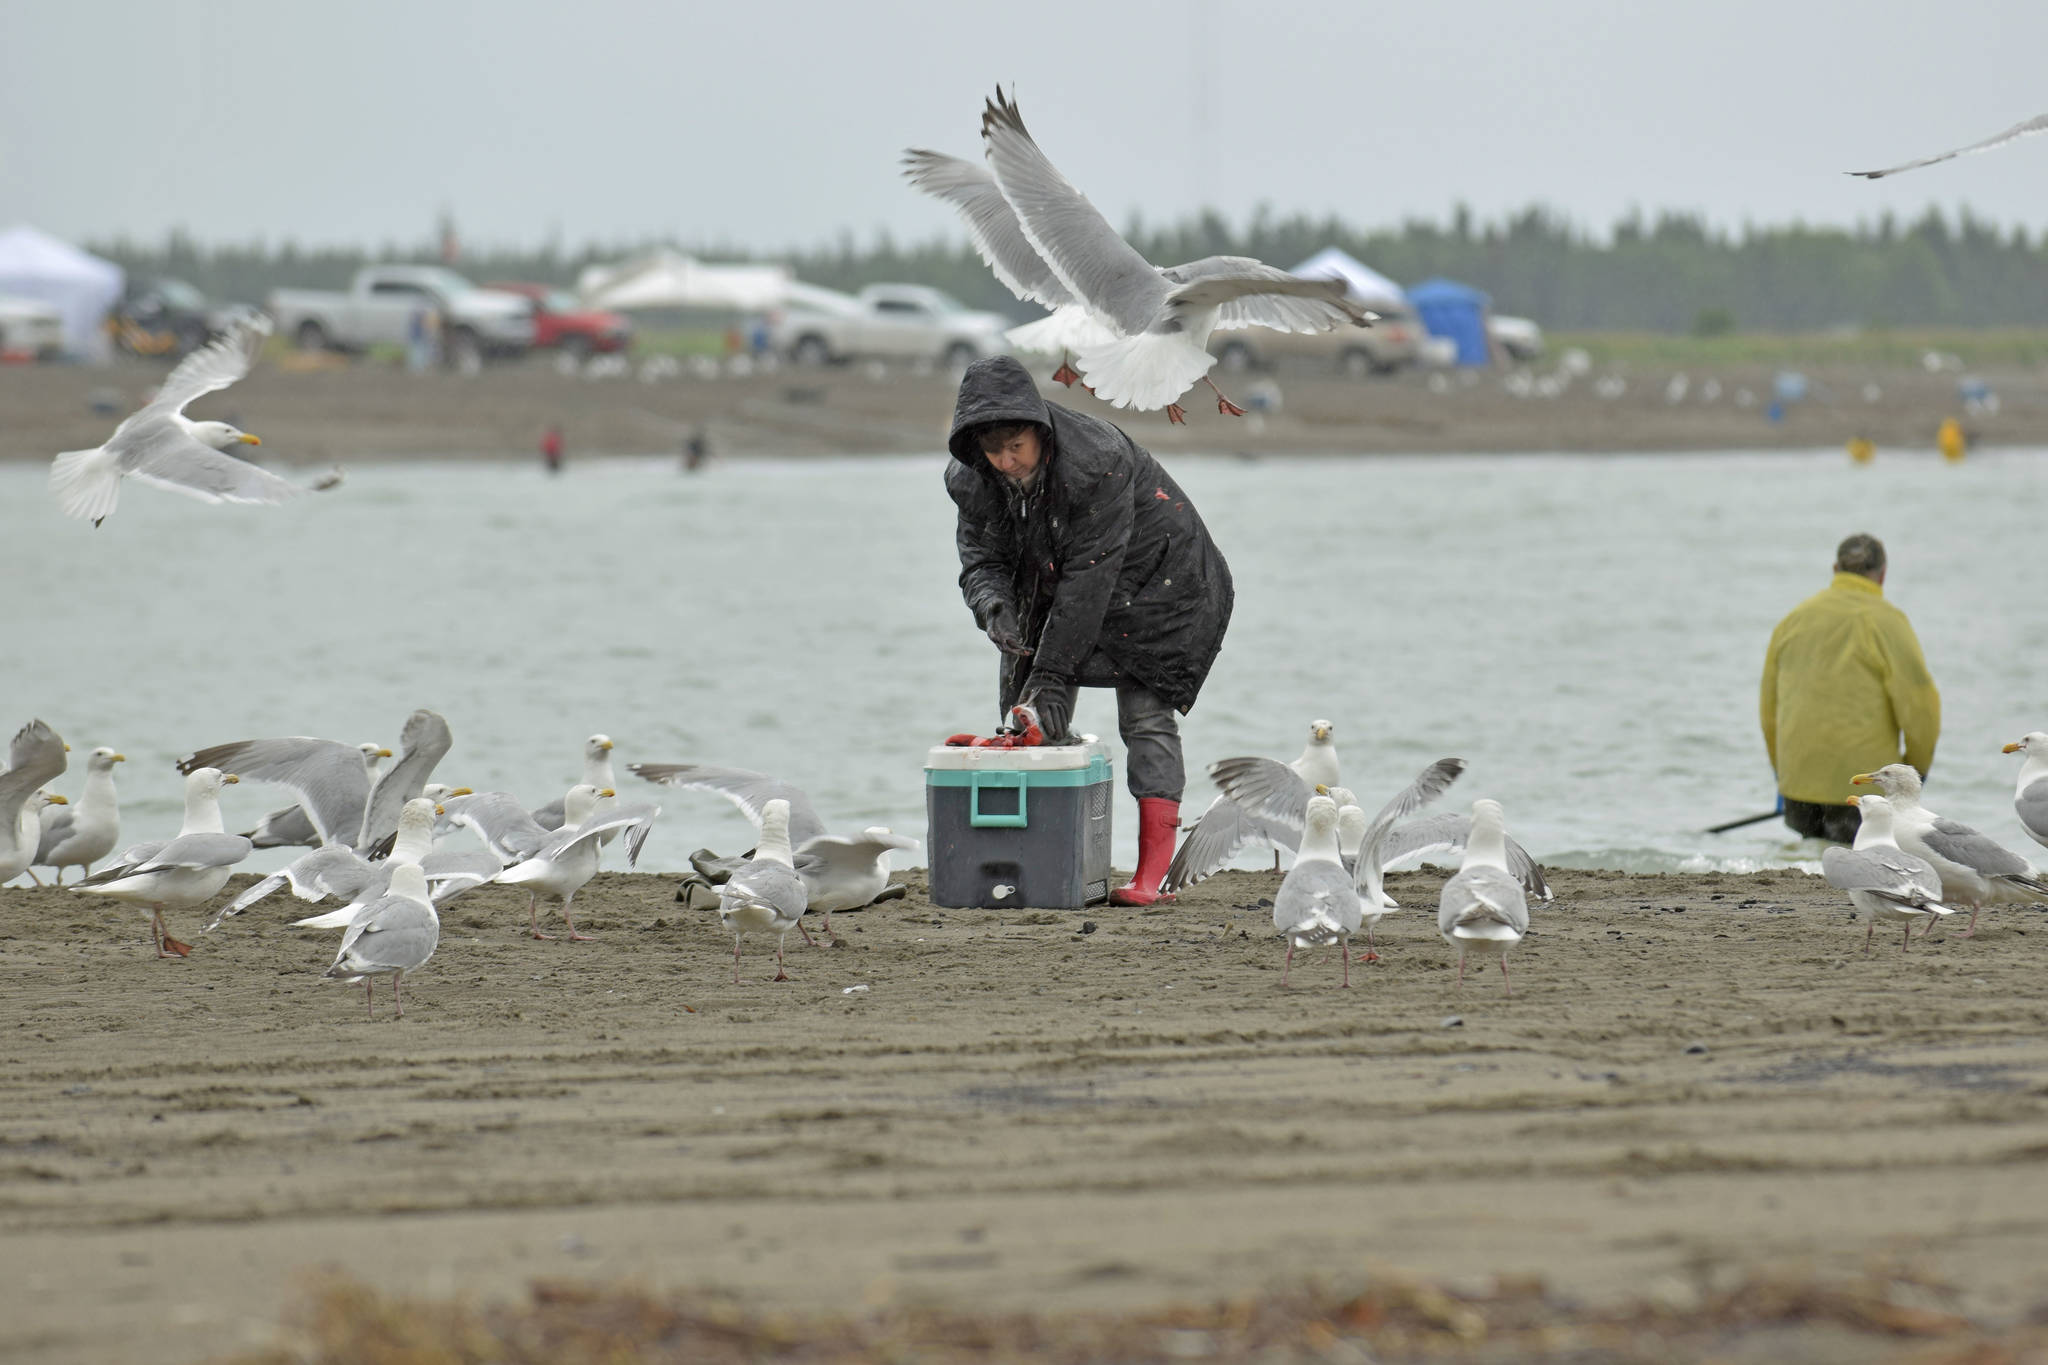 A woman fends off gulls during the first day of dipnetting season on Tuesday, July 10, 2018, on Kenai Beach, in Kenai, Alaska. (Photo by Erin Thompson/Peninsula Clarion)